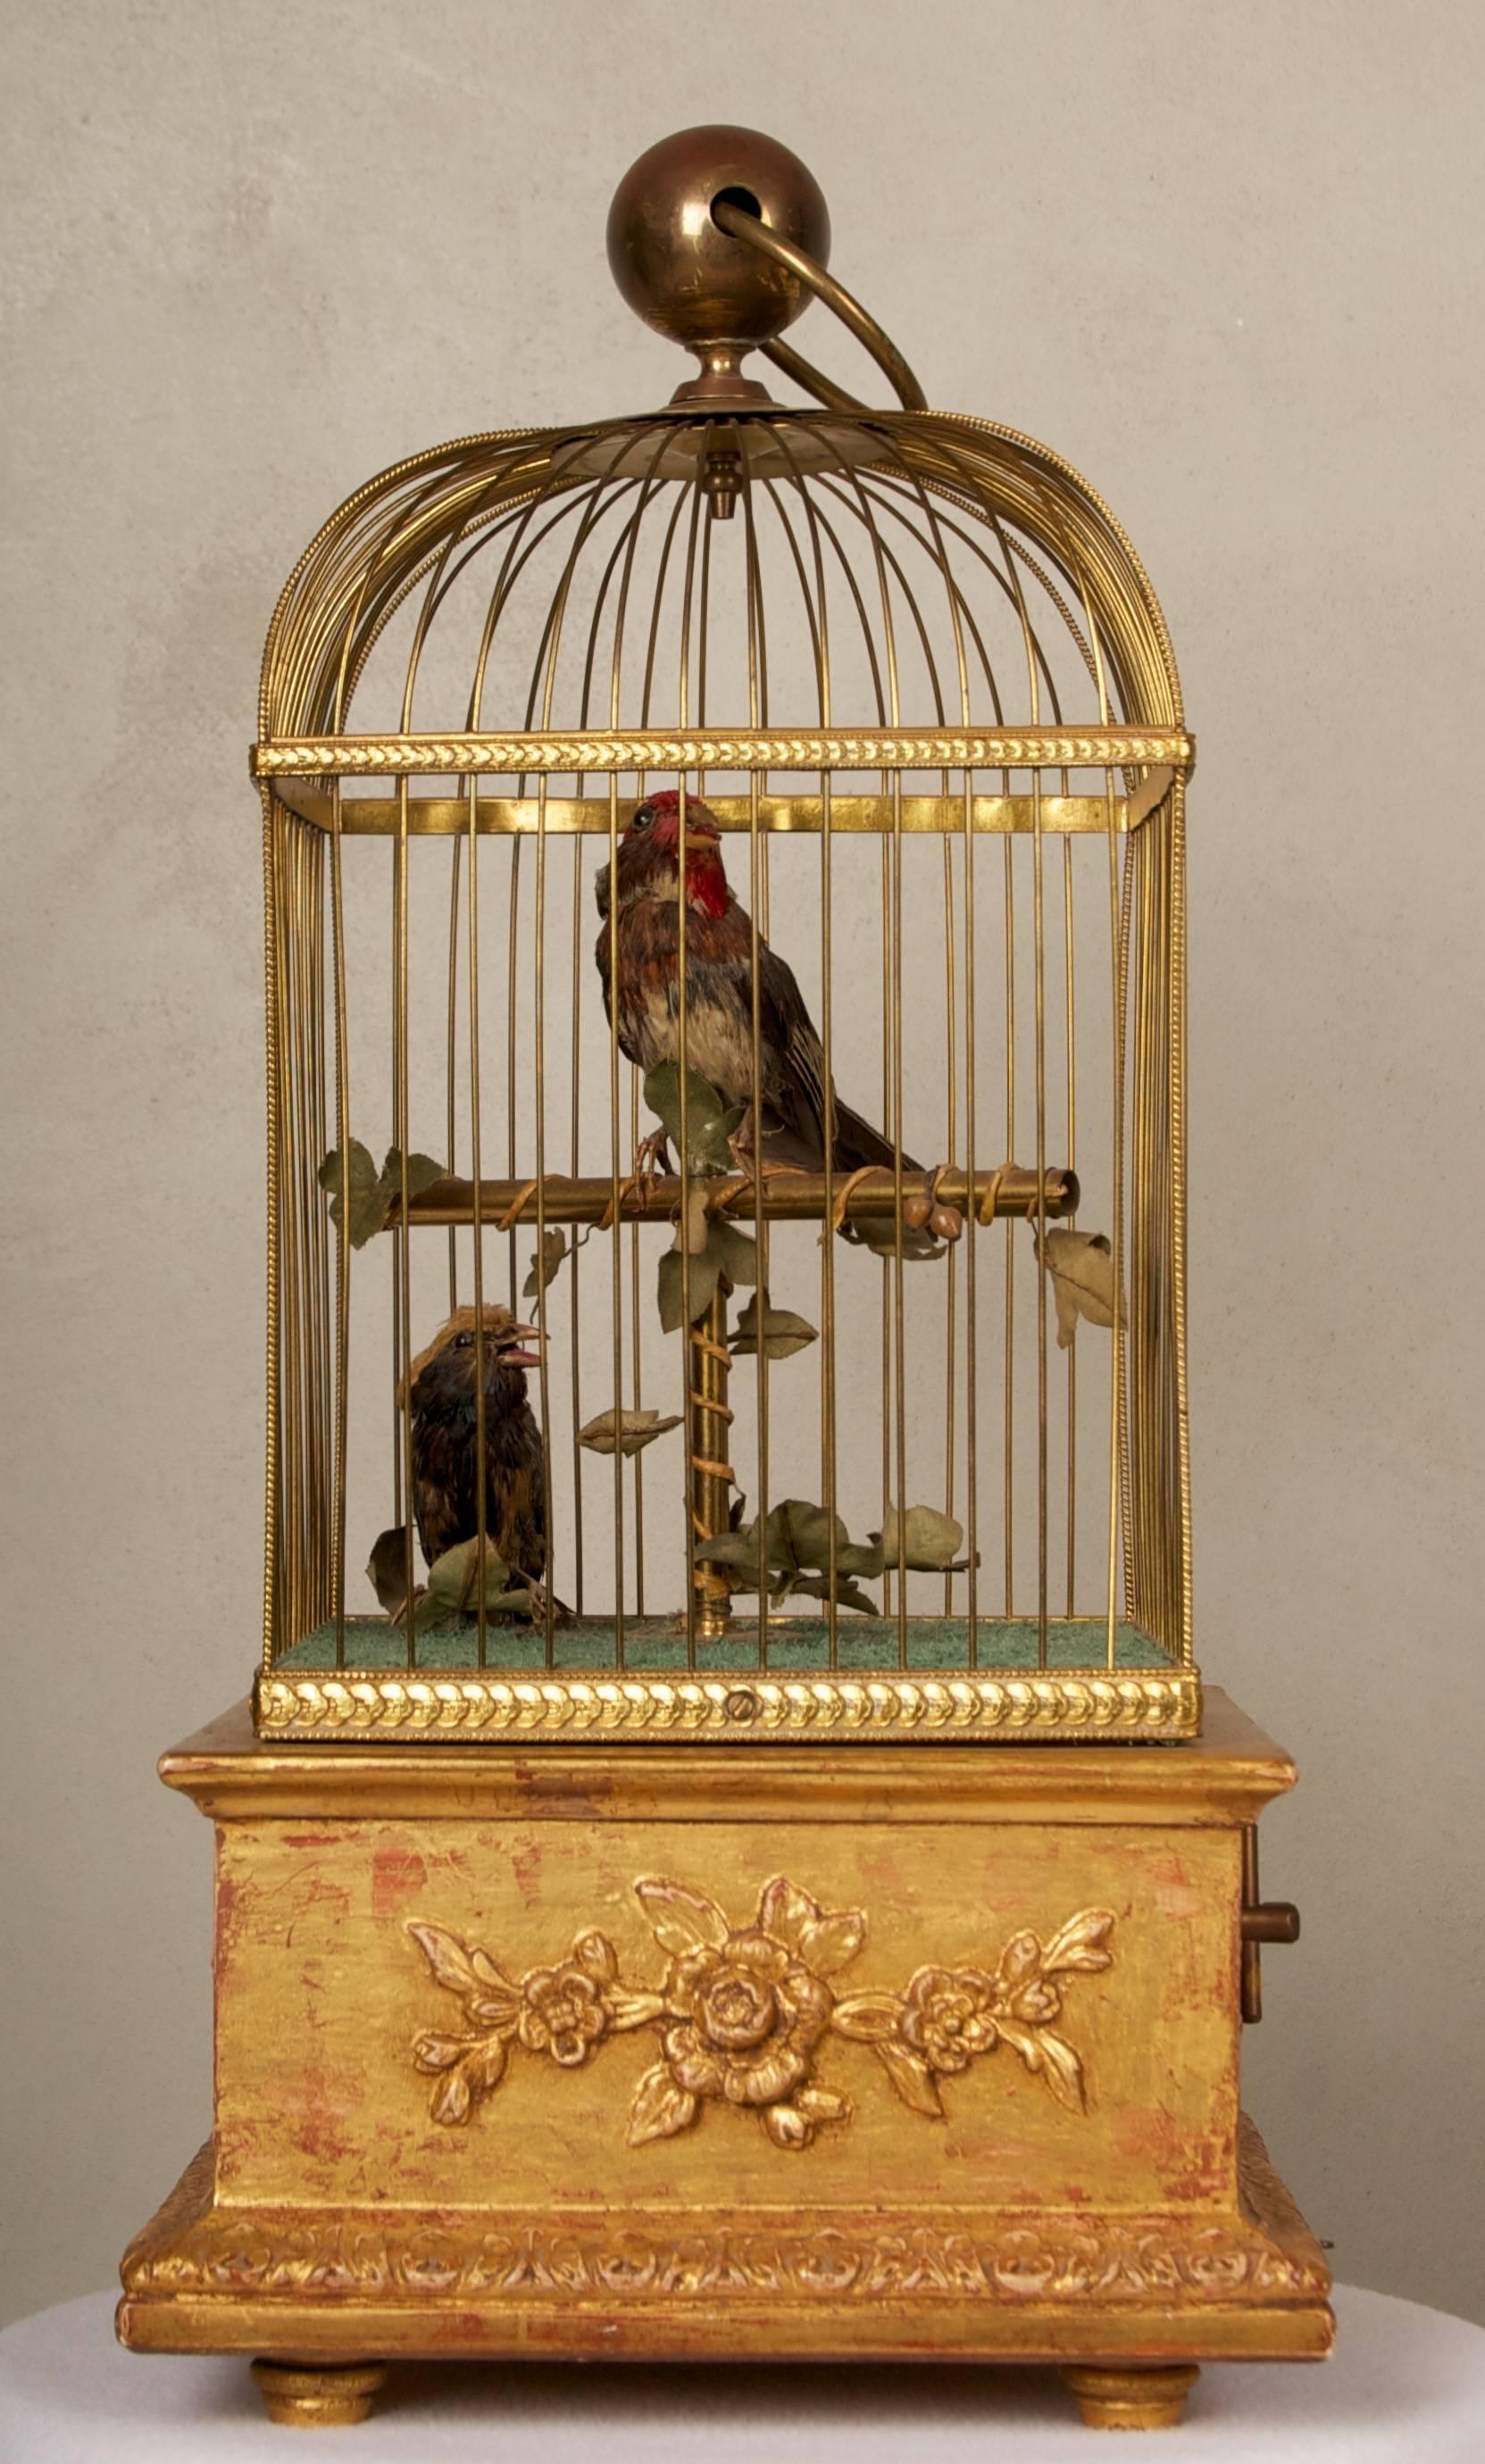 Two feathered mechanical birds in great working condition. Both birds sing,
move their peaks and turn their heads.
The cage base is hand-carved and water gilded.